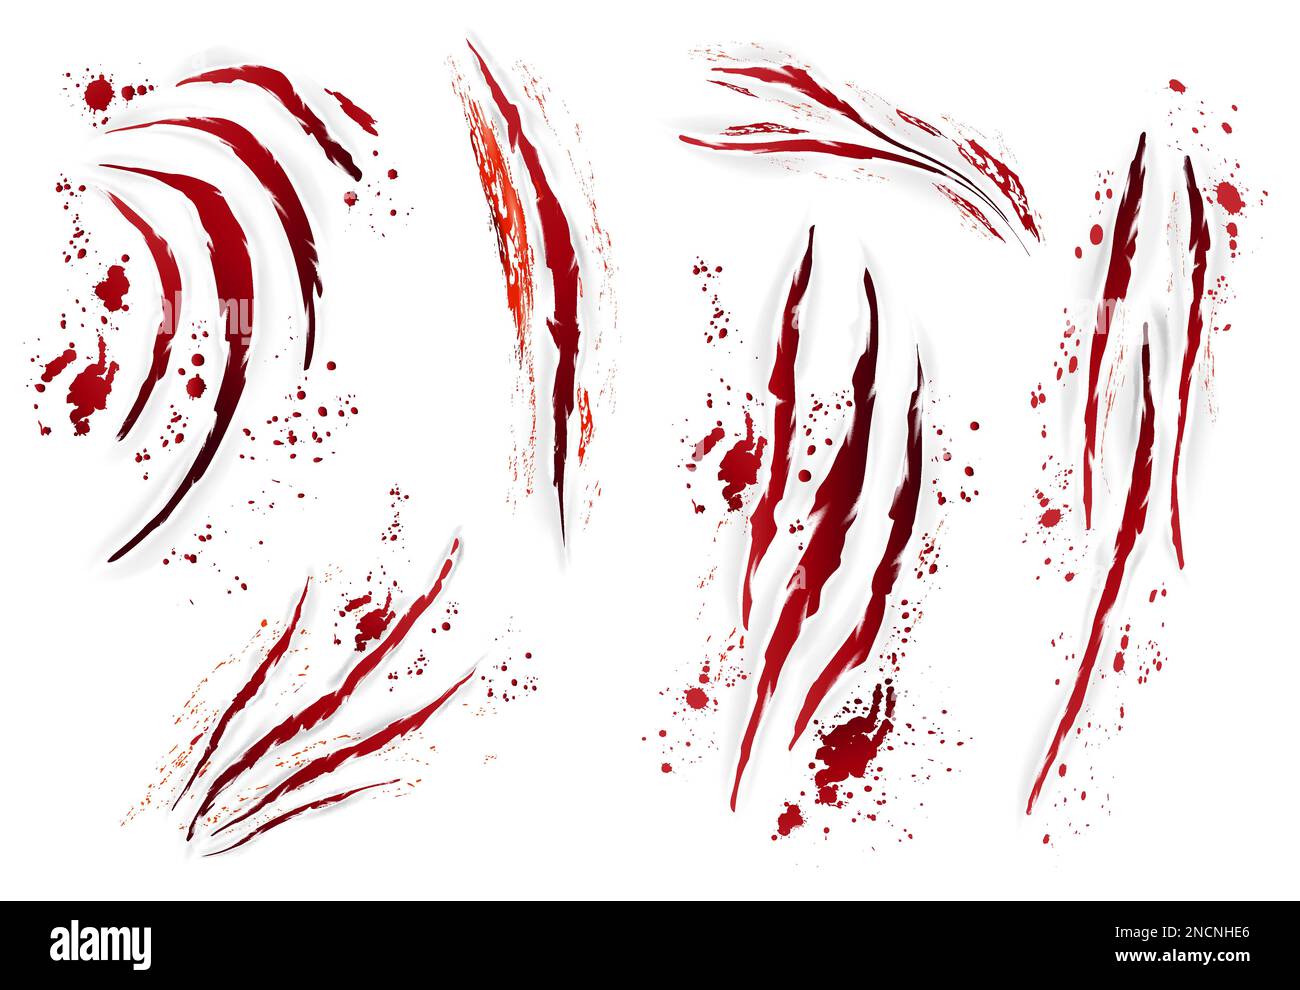 Realistic claws scratches animal blood set with isolated images of bloody scrapes and lots of droplets vector illustration Stock Vector